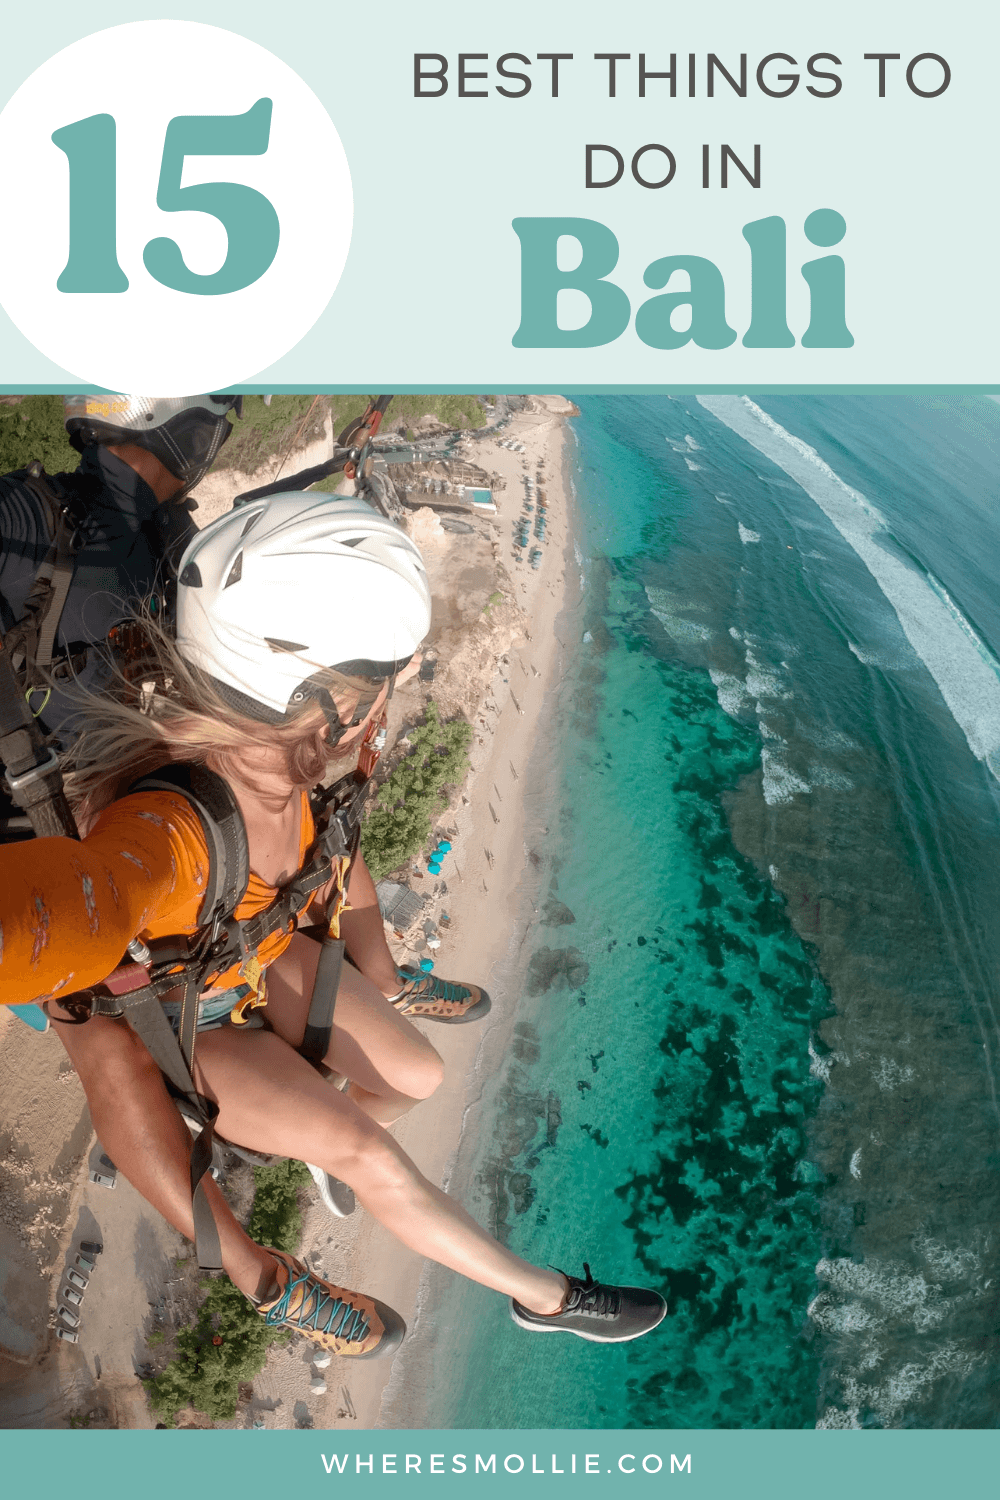 The best things to do in Bali